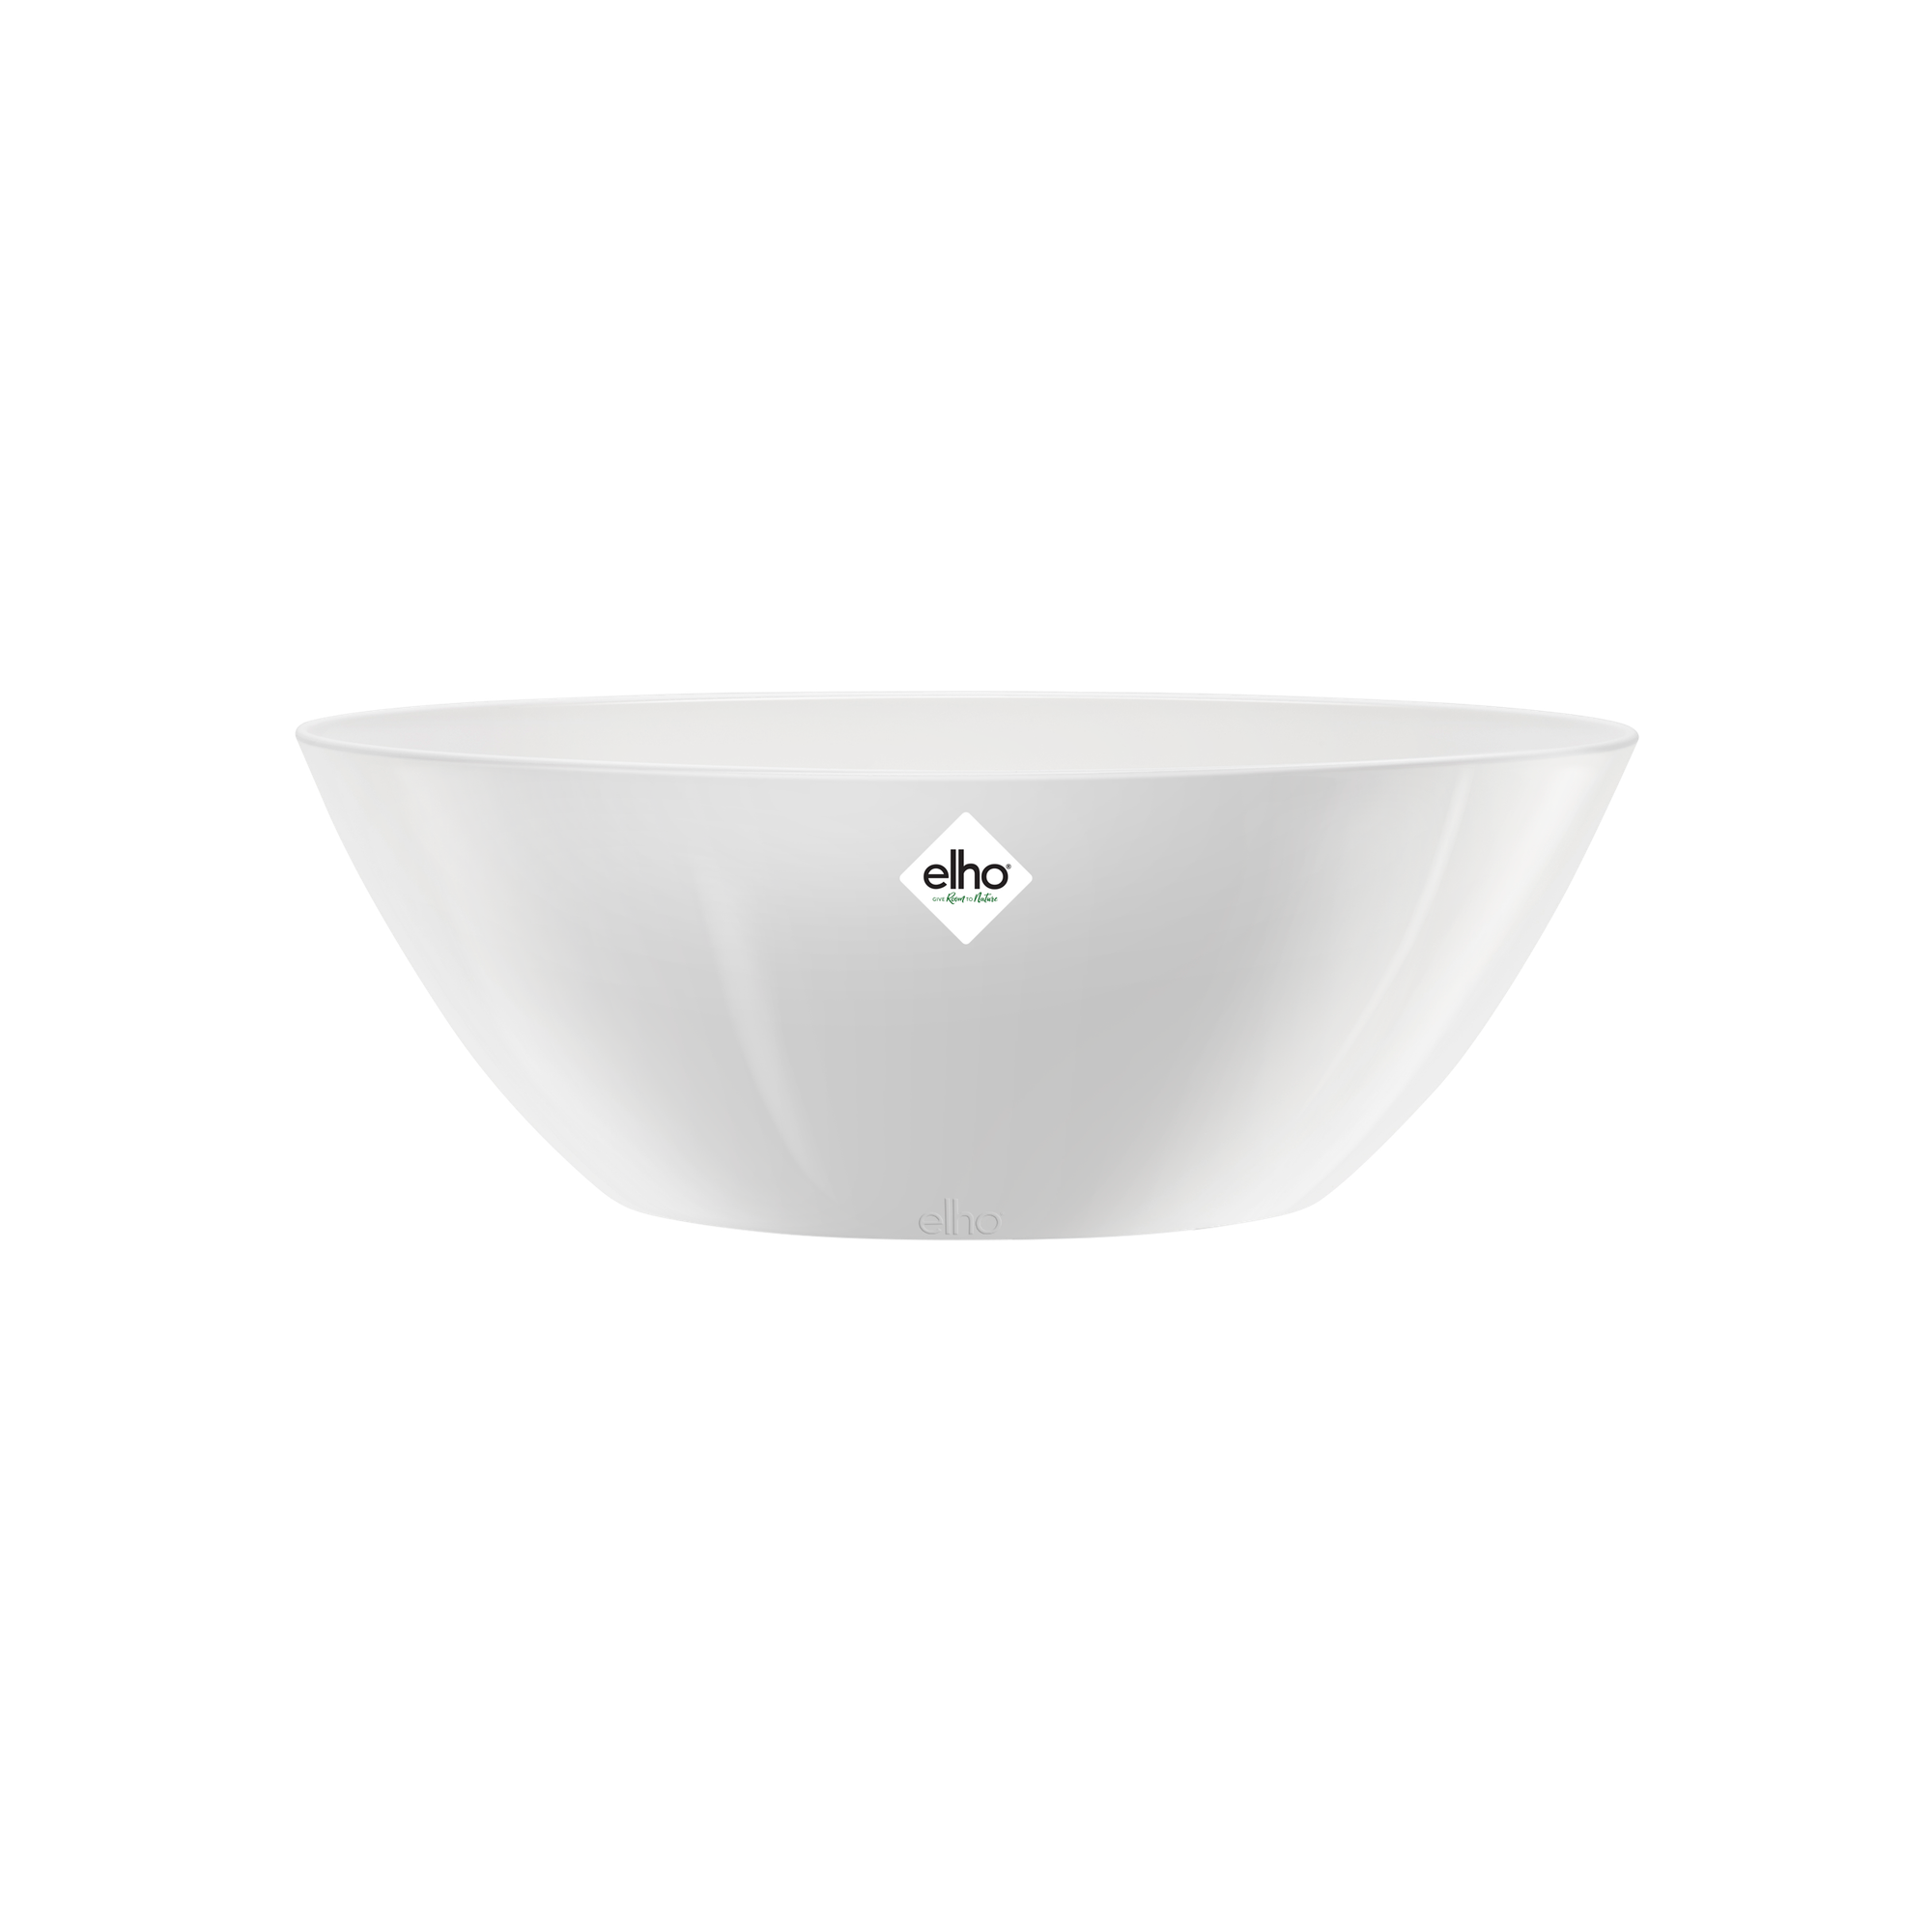 Give - white to nature 36cm elho® - diamond room oval brussels